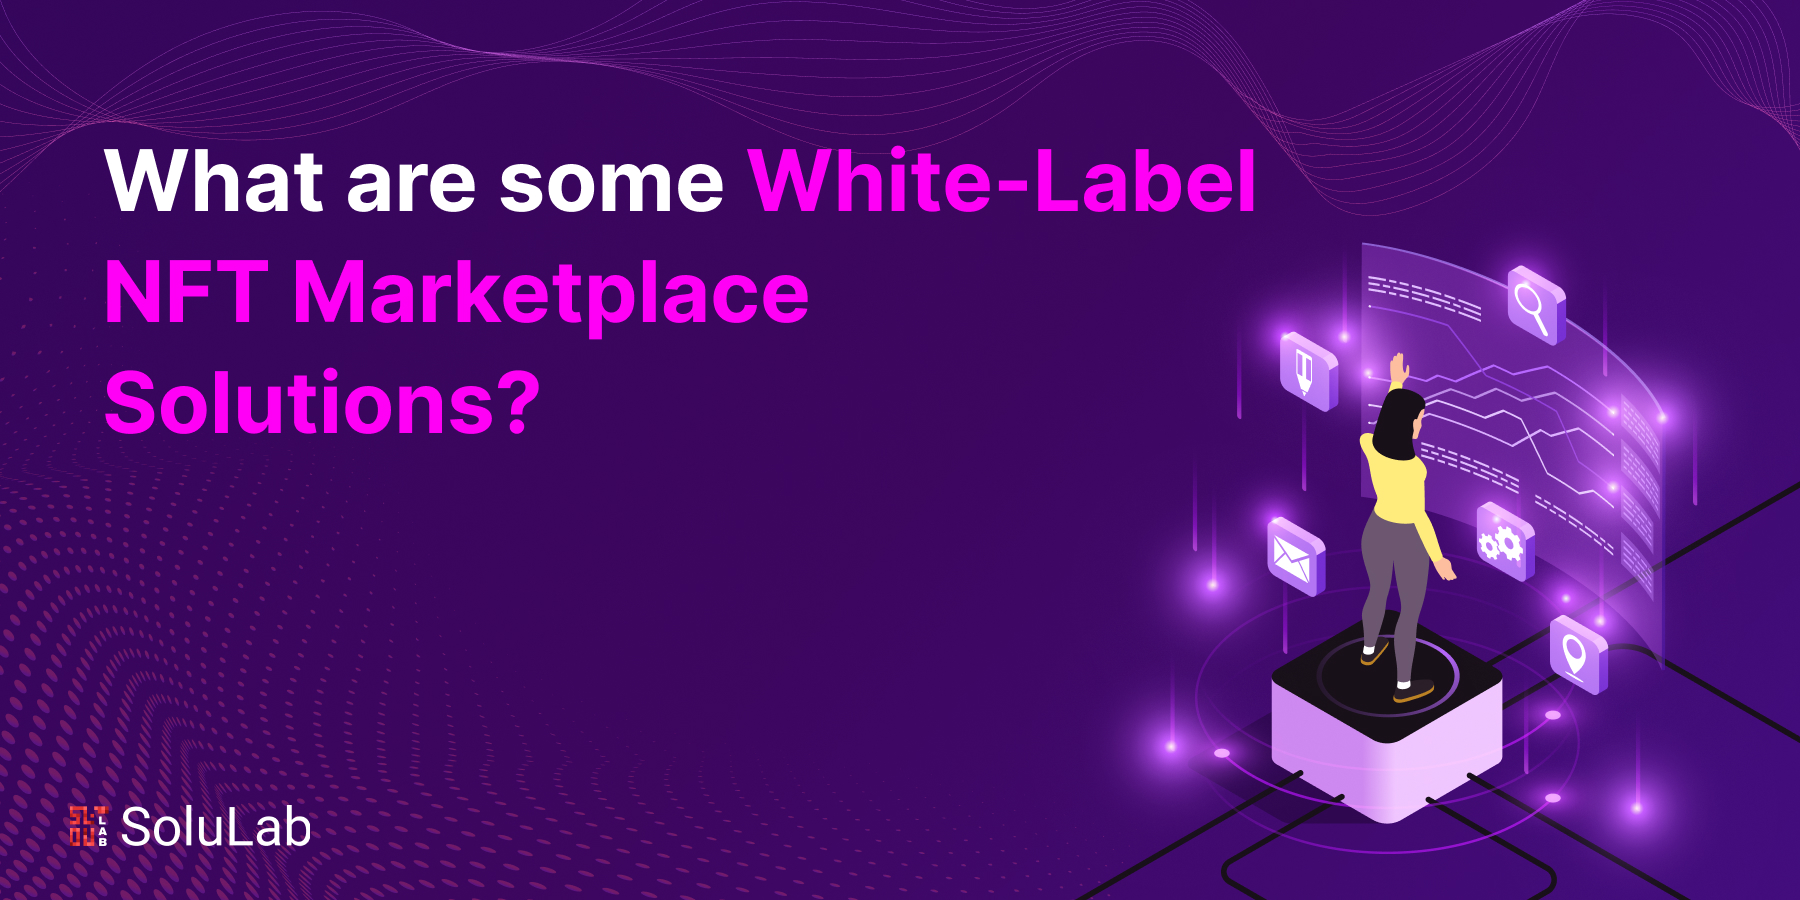 What are some White-Label NFT Marketplace Solutions?